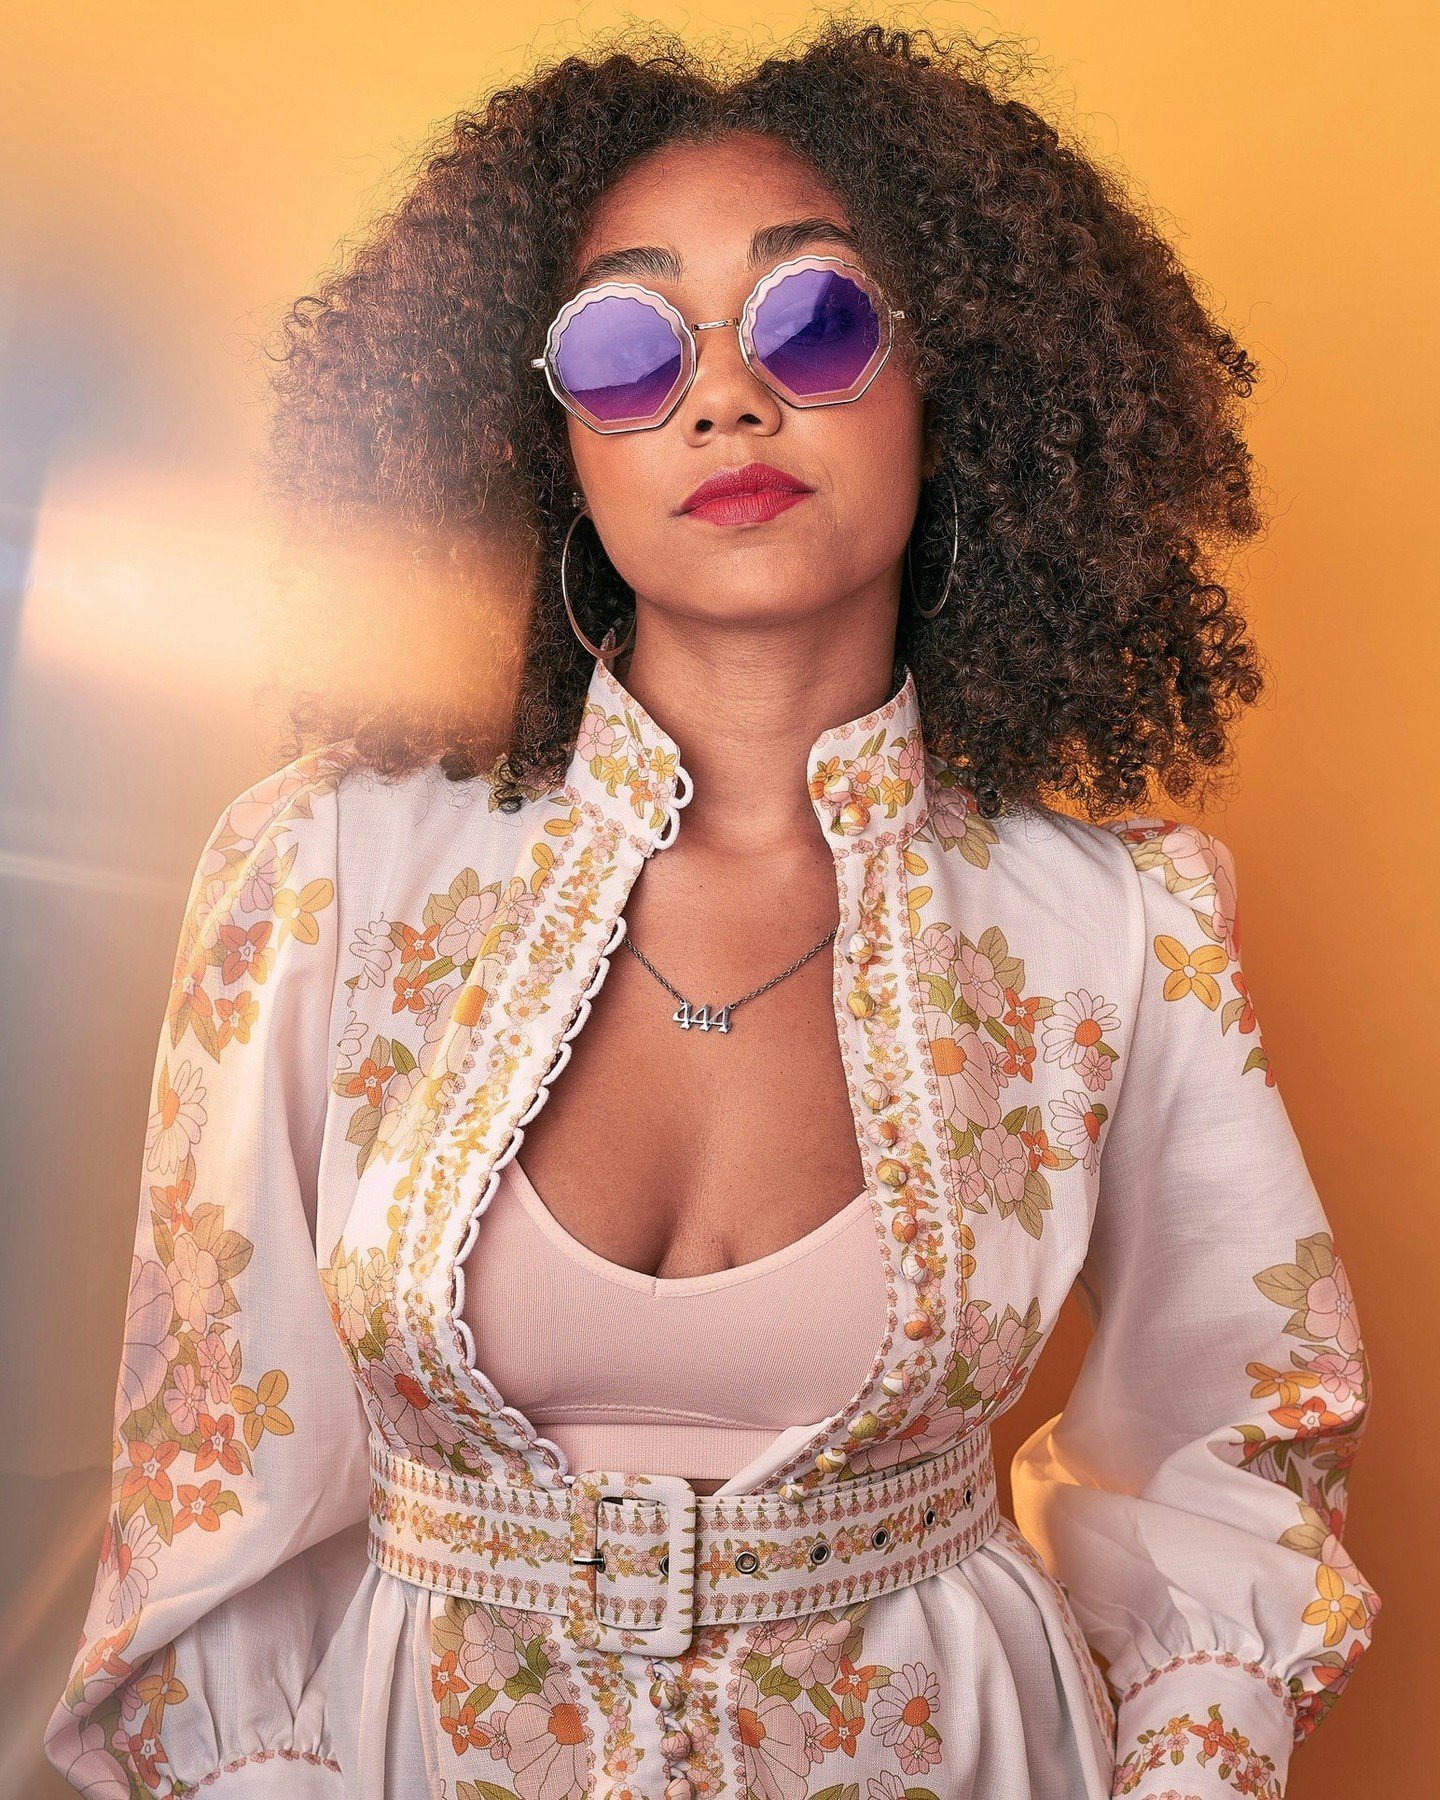 @autumnjonesmusic 

Spring Vibes with Autumn! 

Shot for SOMA Living Magazine. 

Hair by @yonikregersalon
Wardrobe by @retailtherapy_southorange
Photography by @leeseidenbergphotography
CBD products by @thecannabosslady
Photo Assistant @rowandean_pho